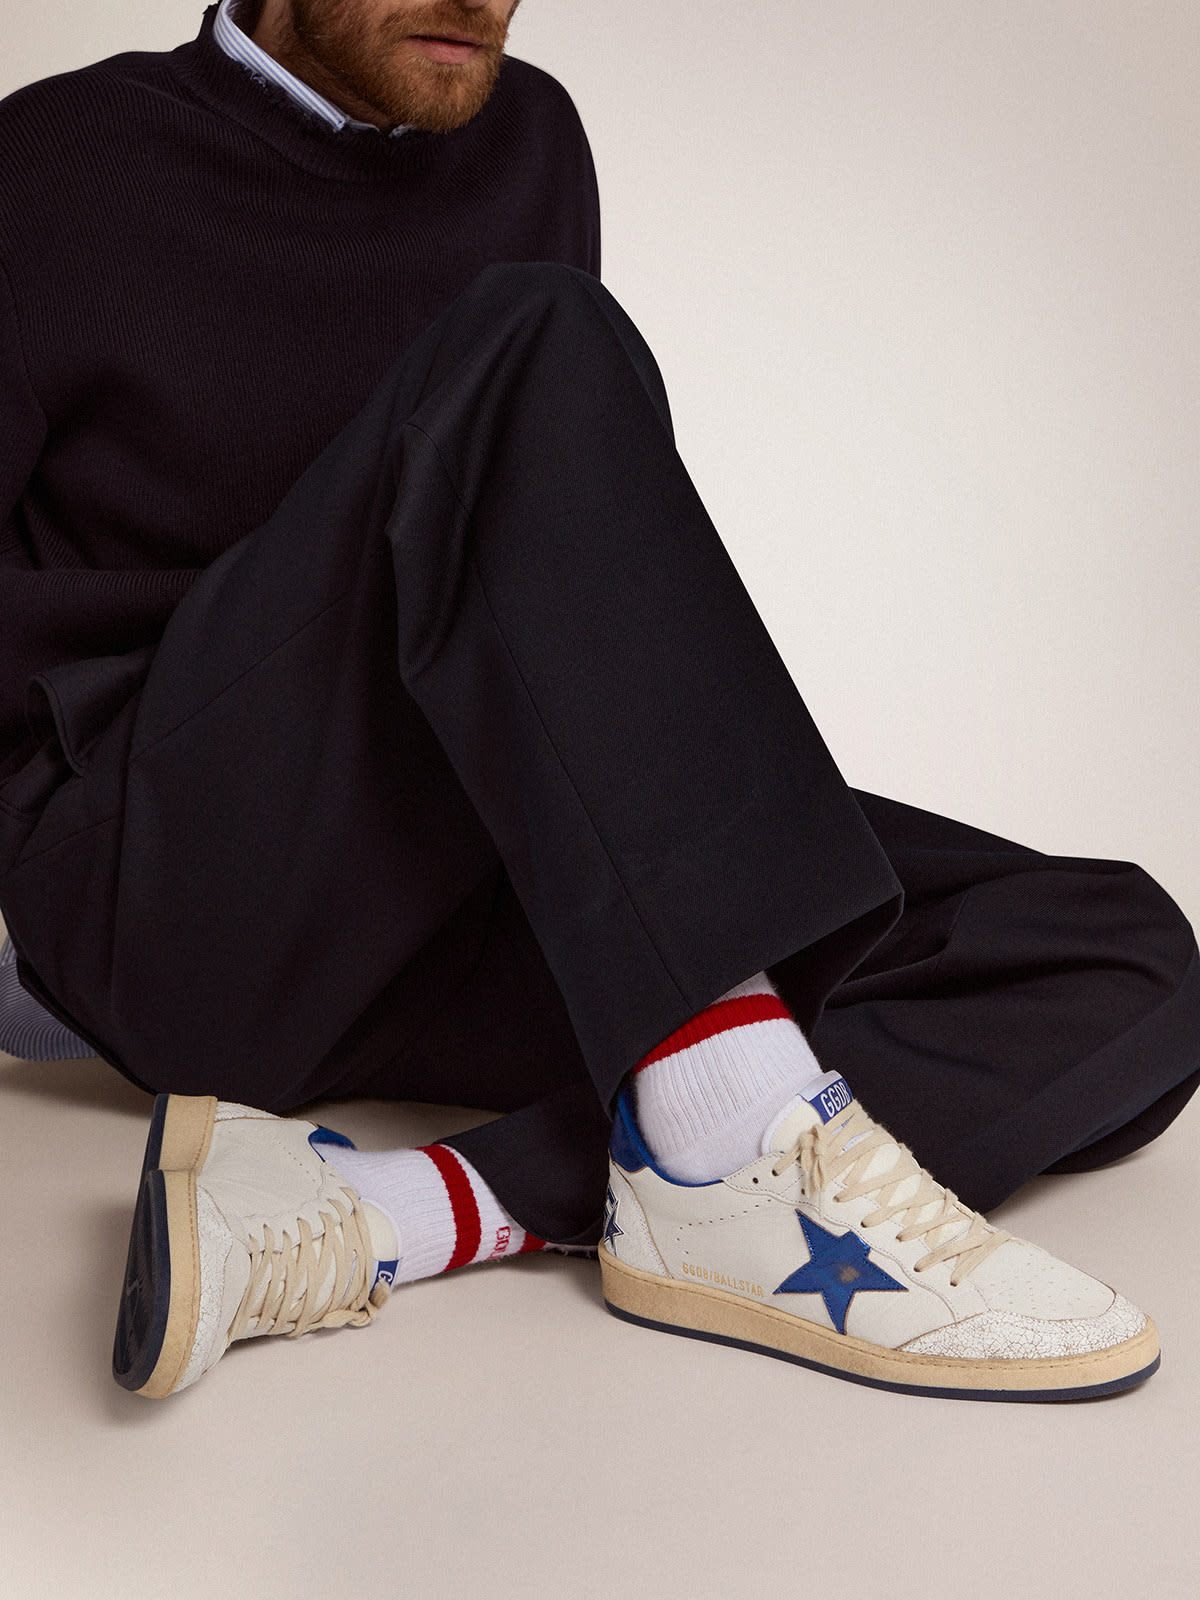 Golden Goose - Men's Ball Star in white nappa with blue star and heel tab in 